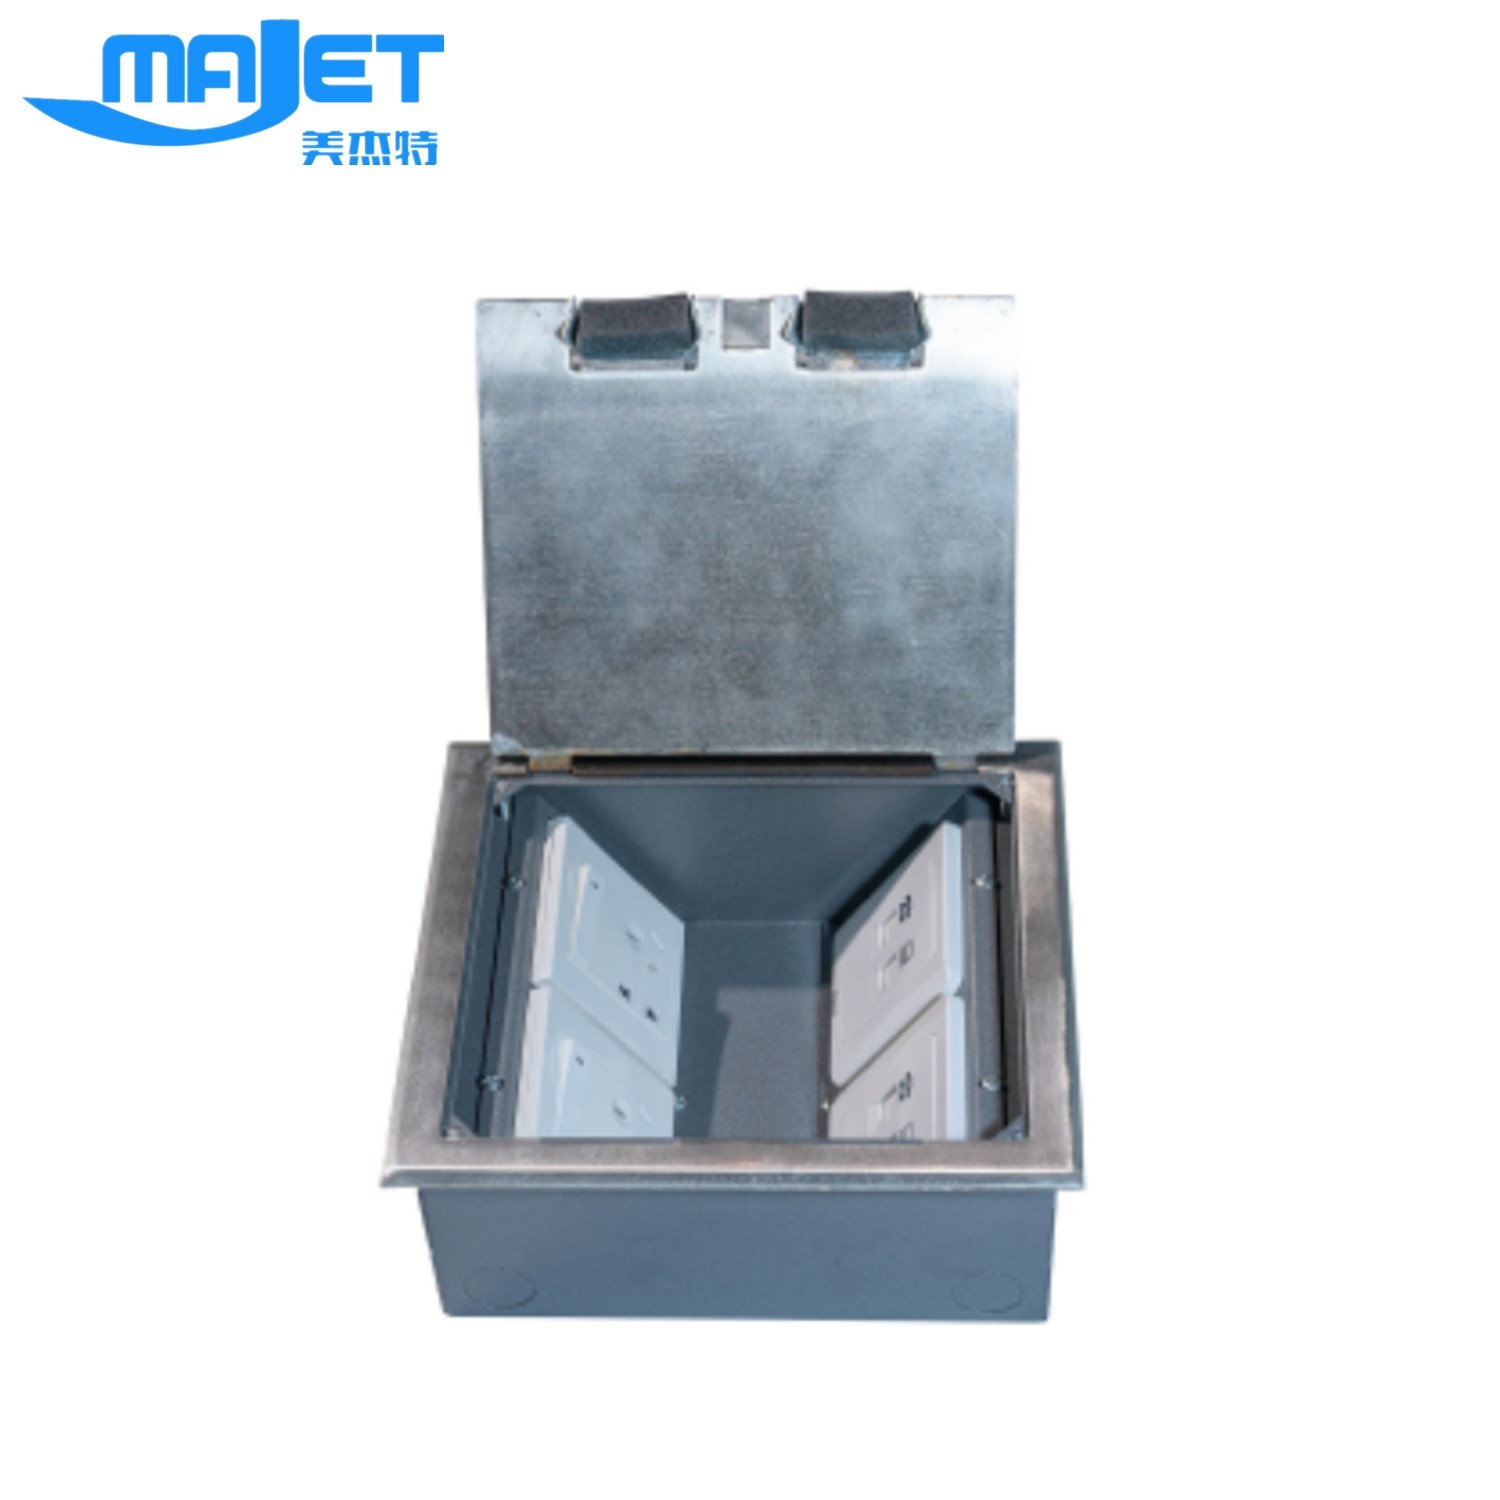 Raised Access Floor box Electrical & Electronic outlet box system 